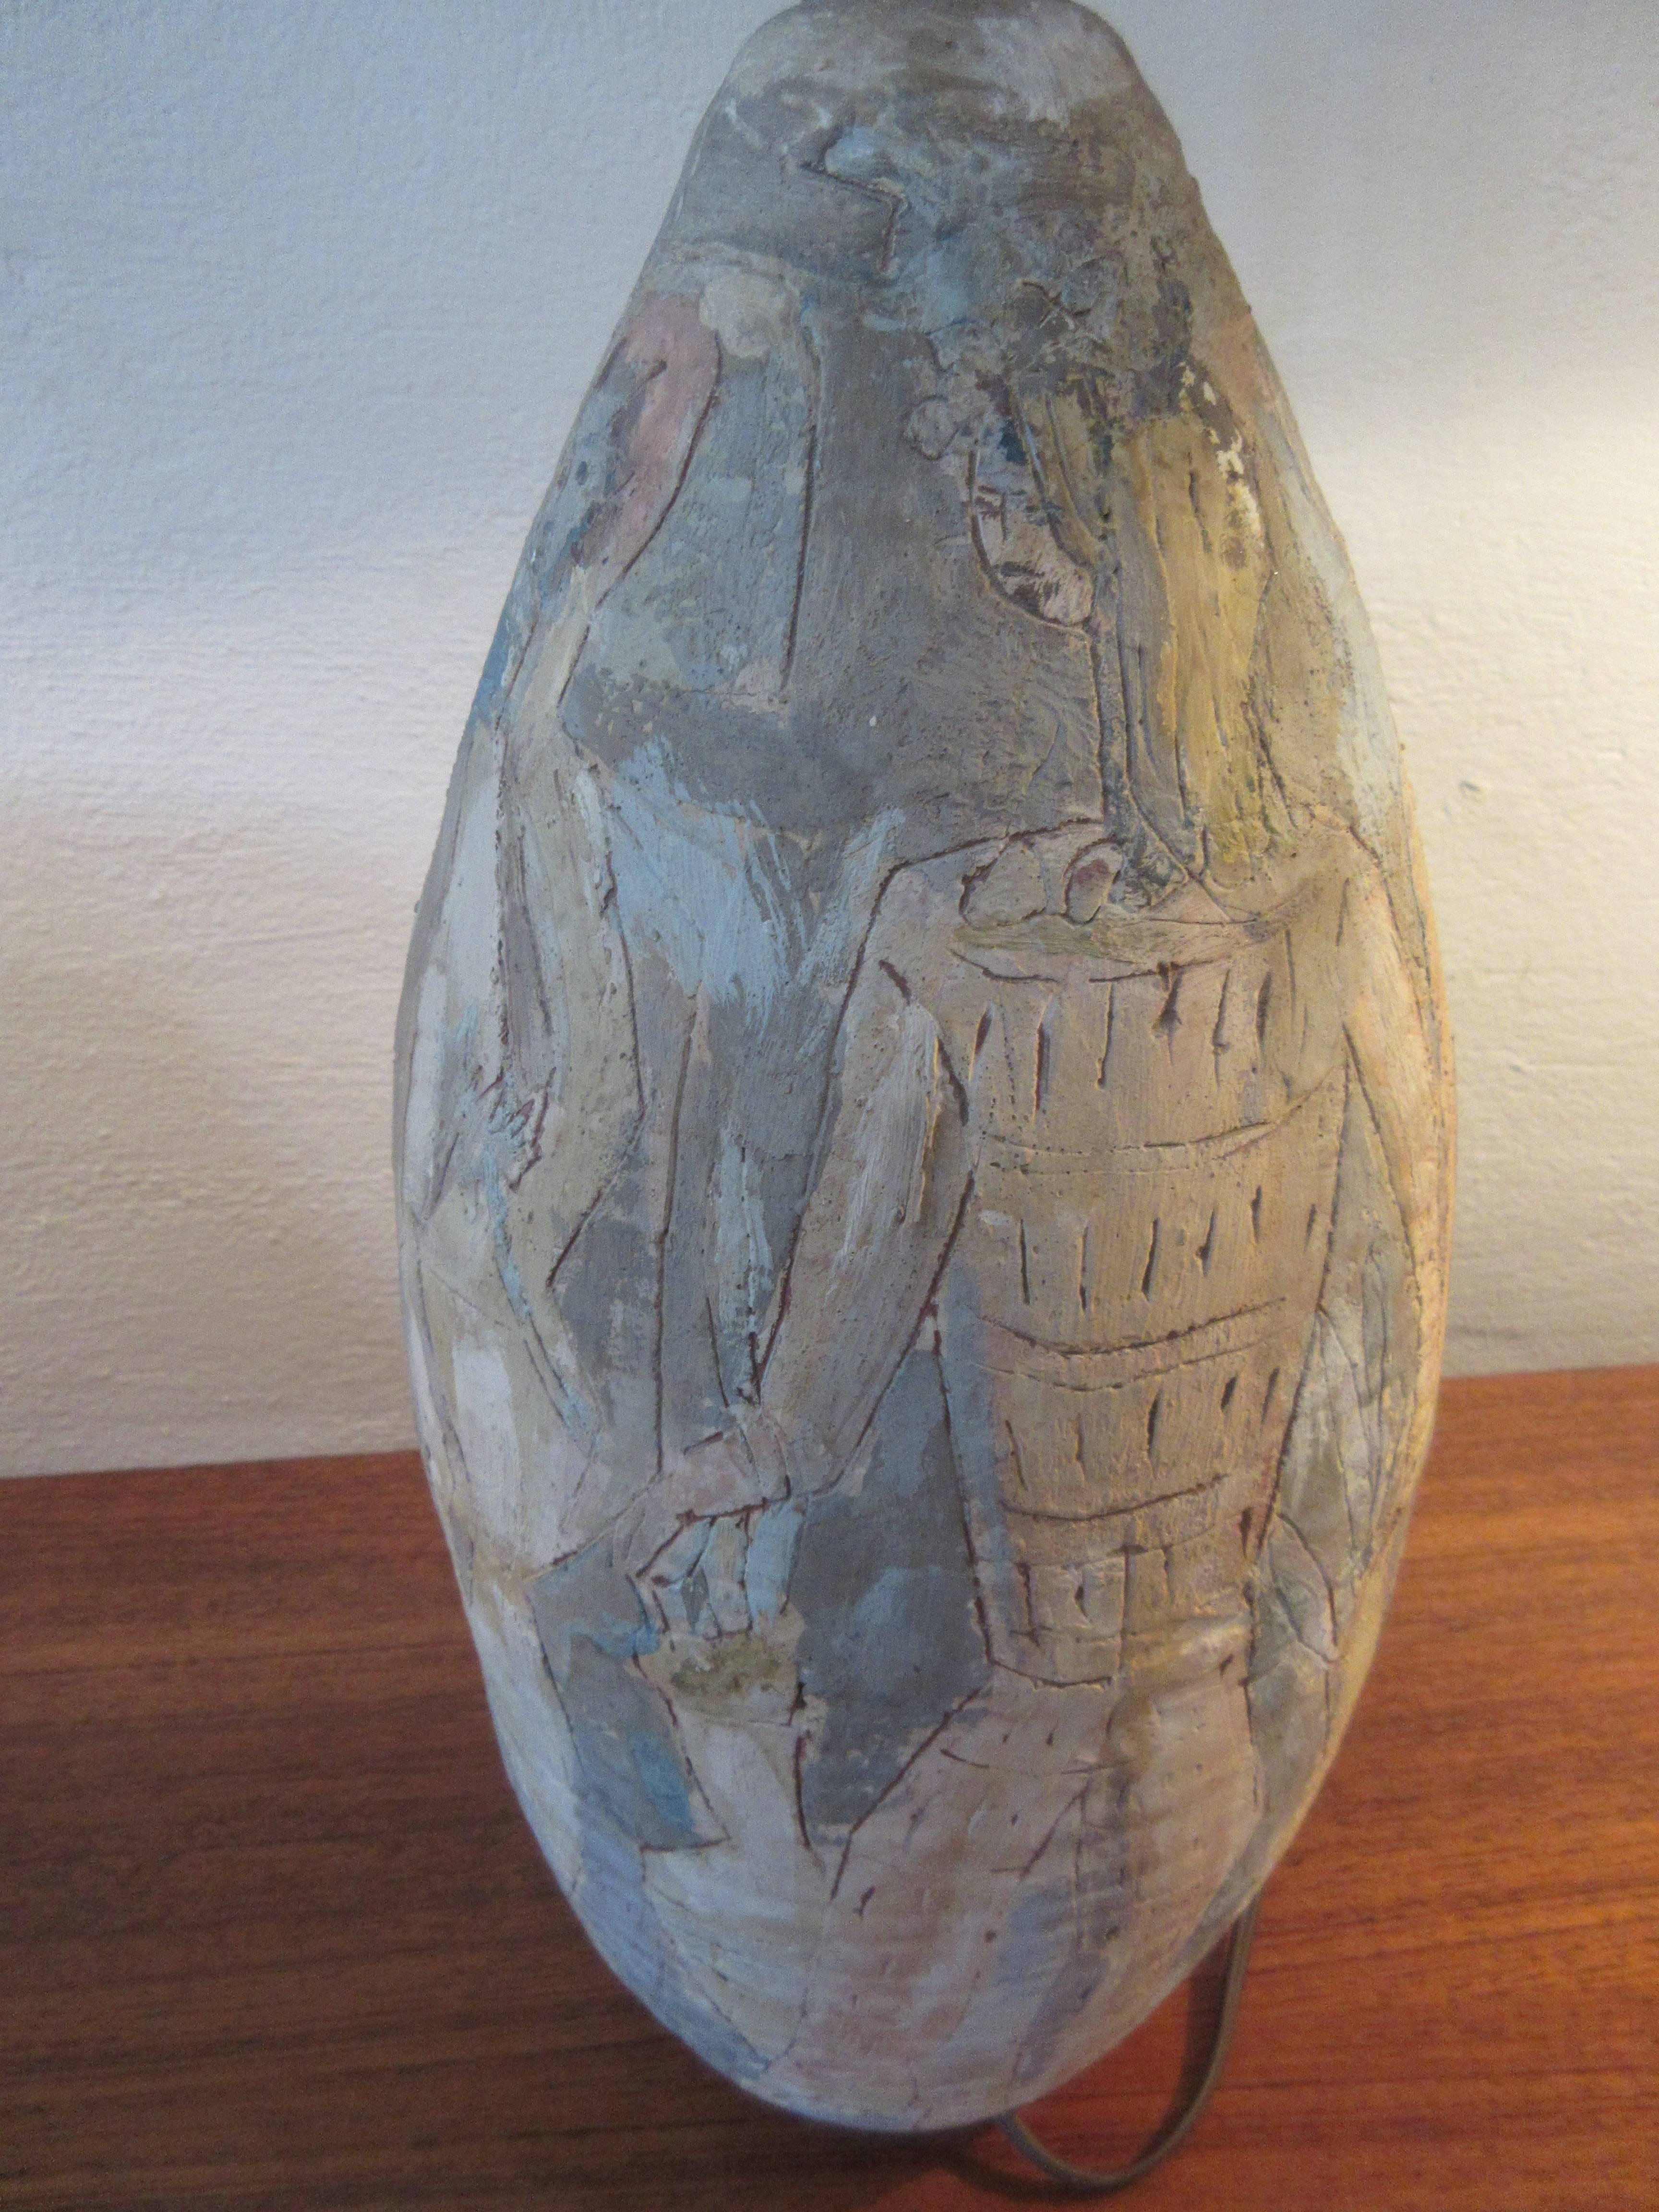 Possibly Italian, hand-thrown 1950s table lamp with incised figurative ladies. Painted in shades of blues and pinks. Unsigned but very nice quality and design. Pottery is about 7